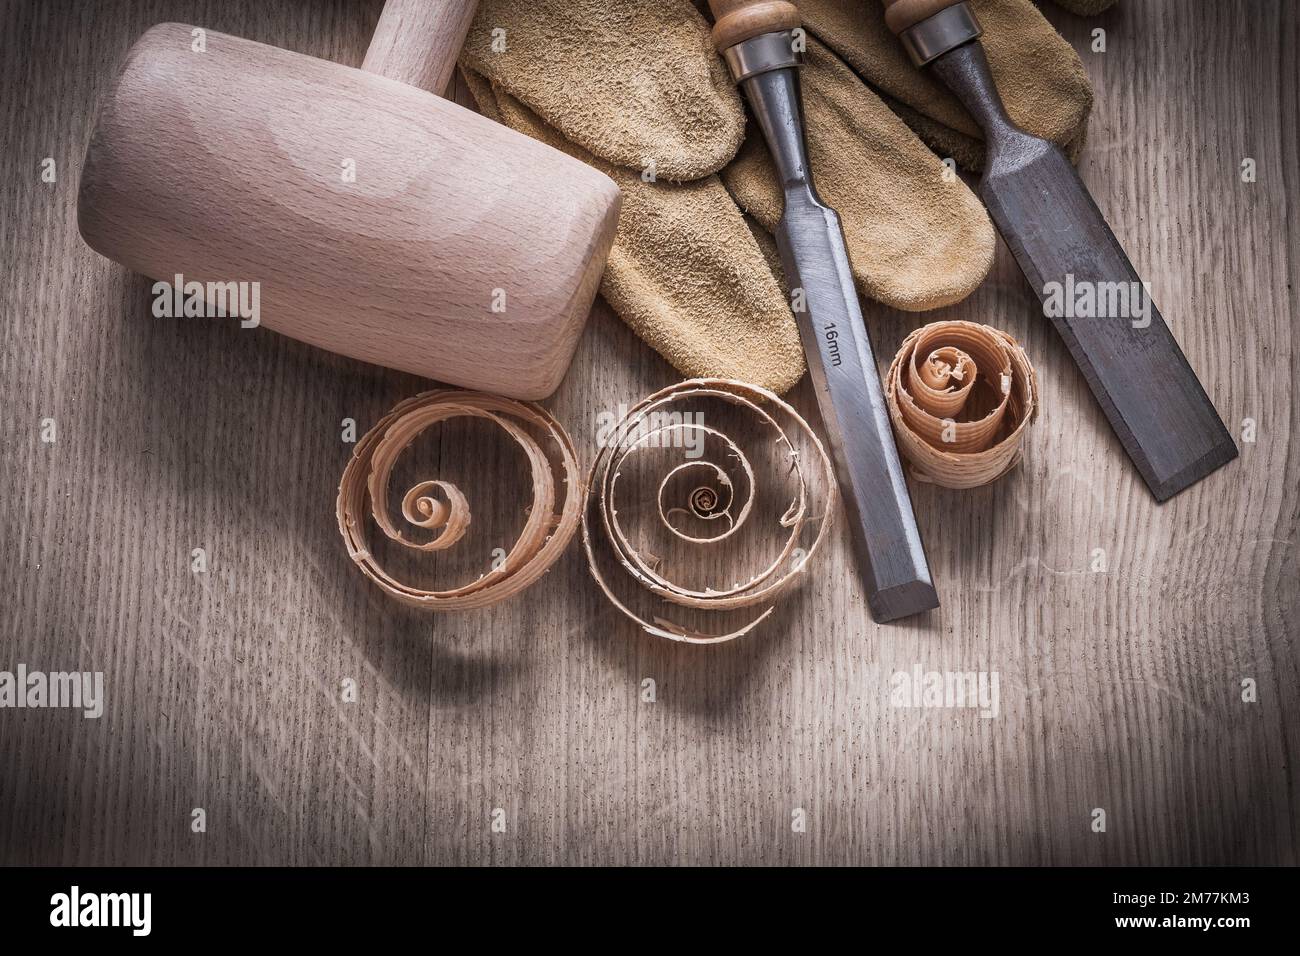 Wooden mallet curled up shavings firmer chisels leather gloves on wood board construction concept. Stock Photo